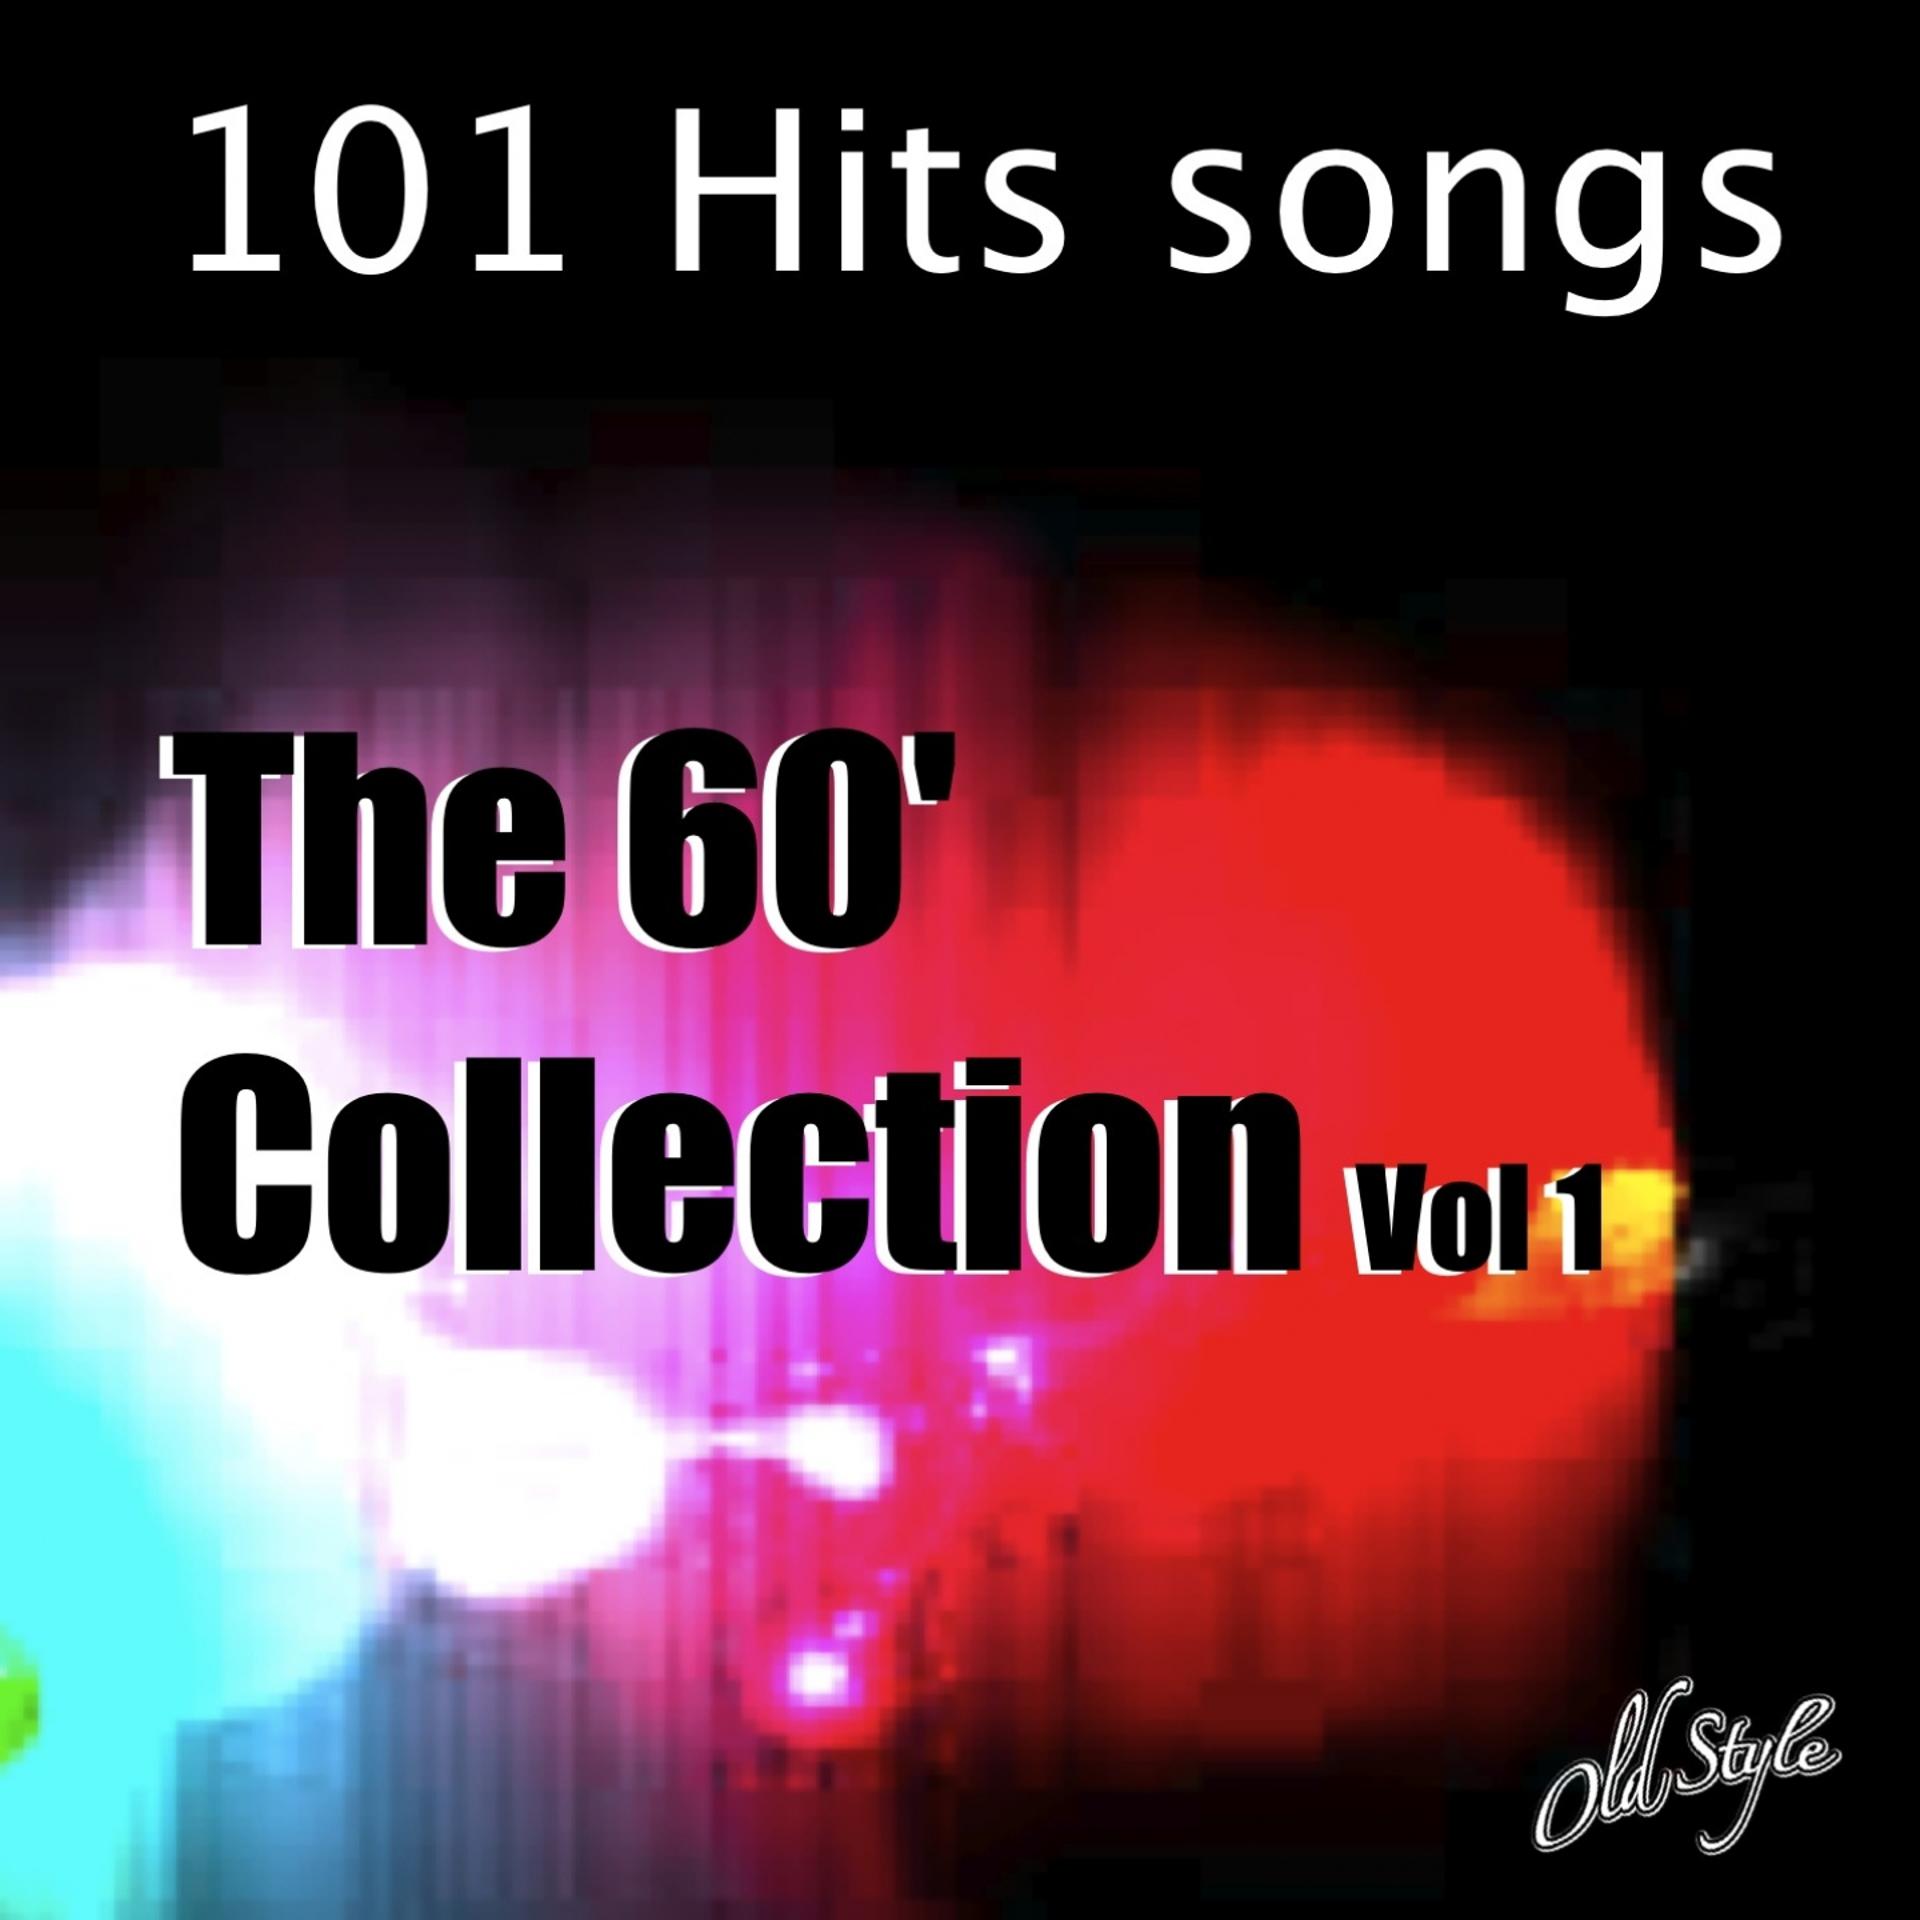 Постер альбома The 60' Collection, Vol. 1 (101 Hits Songs)